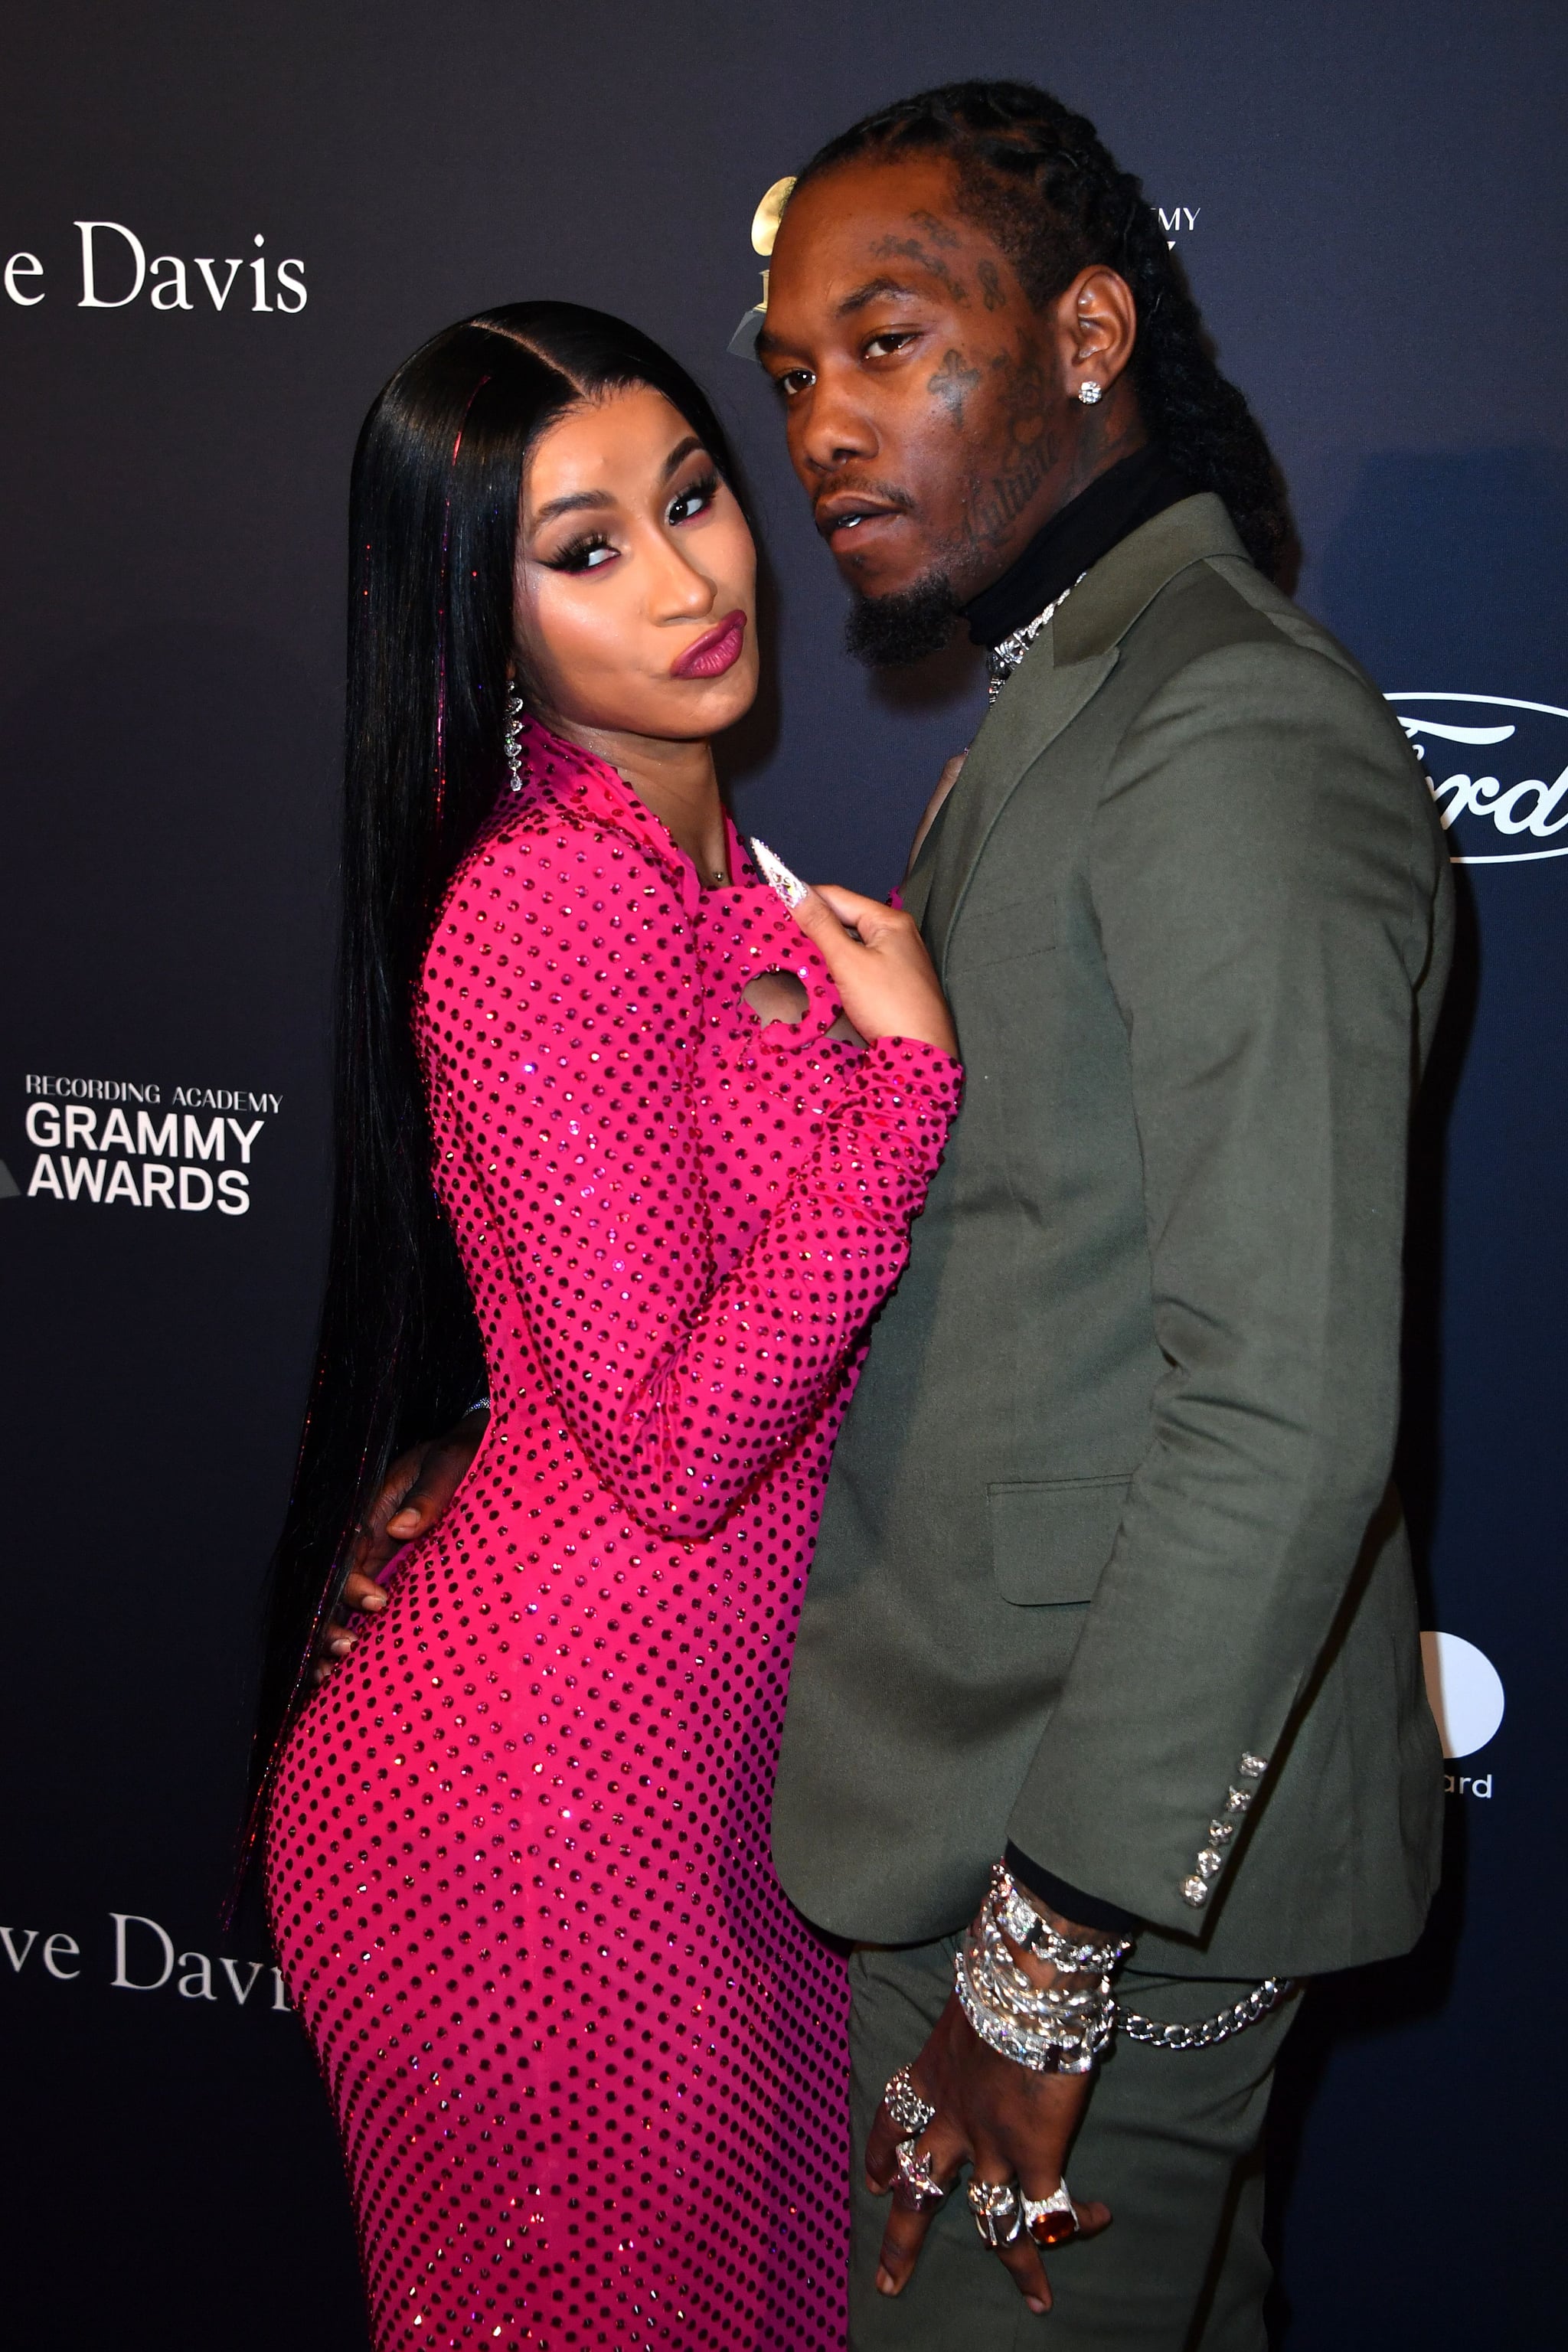 US rapper Cardi B and boyfriend Offset arrive for the Recording Academy and Clive Davis pre-Grammy gala at the Beverly Hilton hotel in Beverly Hills, California on January 25, 2020. (Photo by Mark RALSTON / AFP) (Photo by MARK RALSTON/AFP via Getty Images)